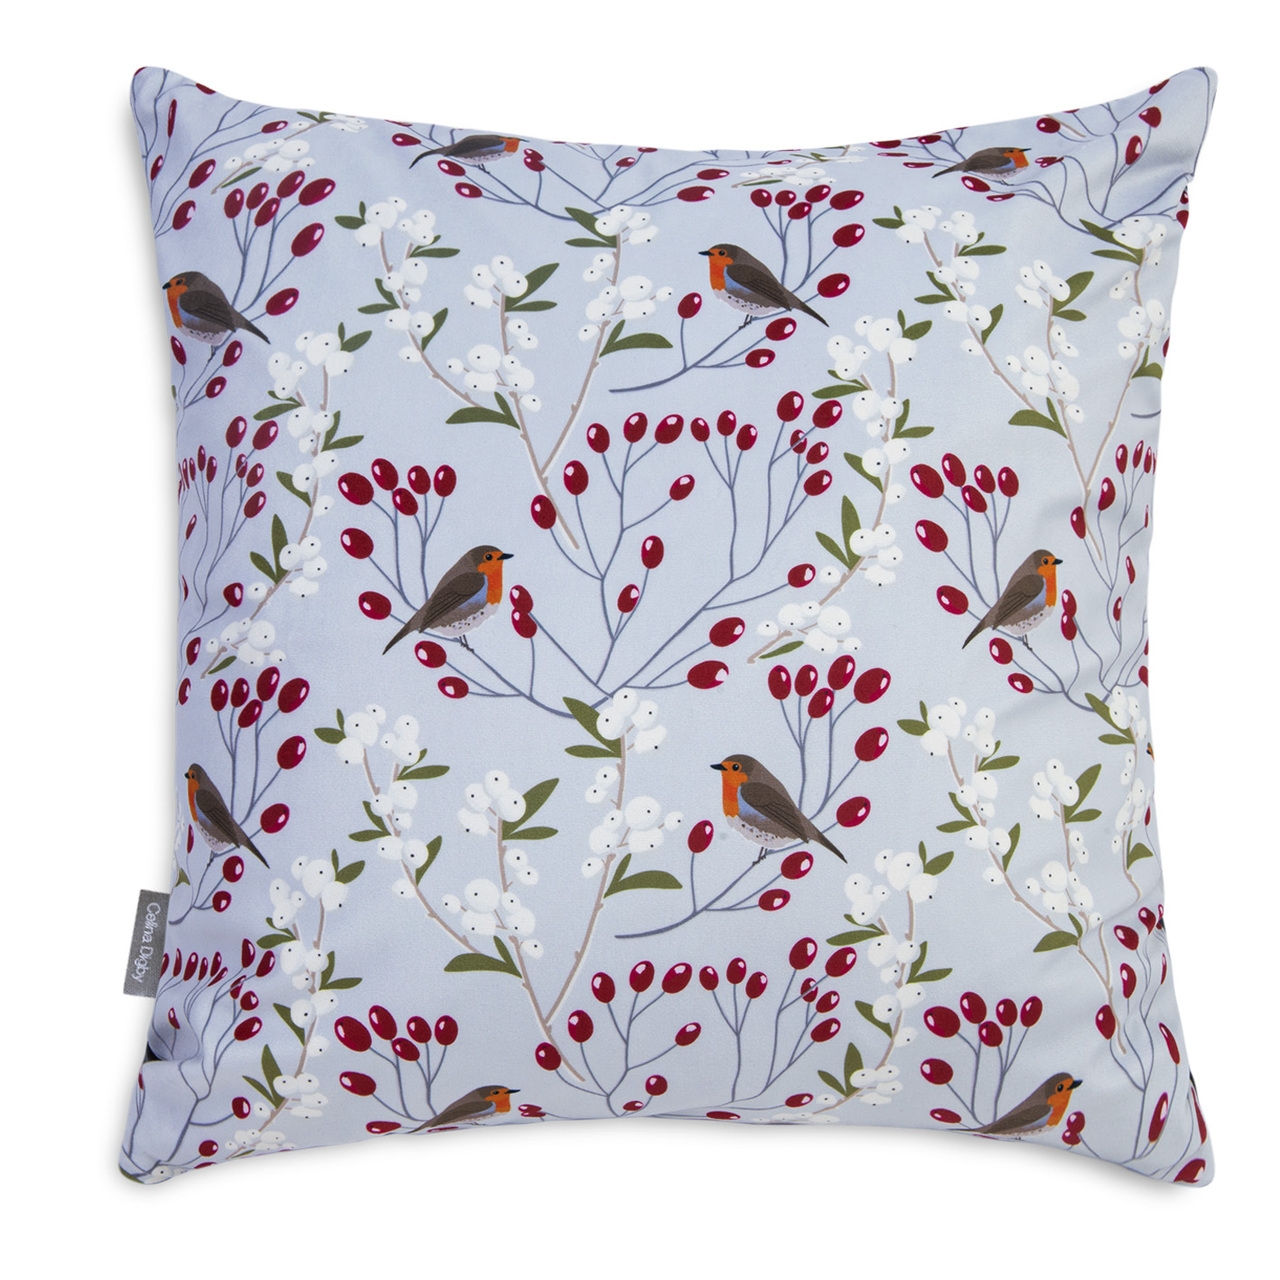 Celina Digby Luxury Christmas Velvet Cushion – Robin & Berries Light Grey Available in 2 Sizes Extra Large (55cm) Feather Filling